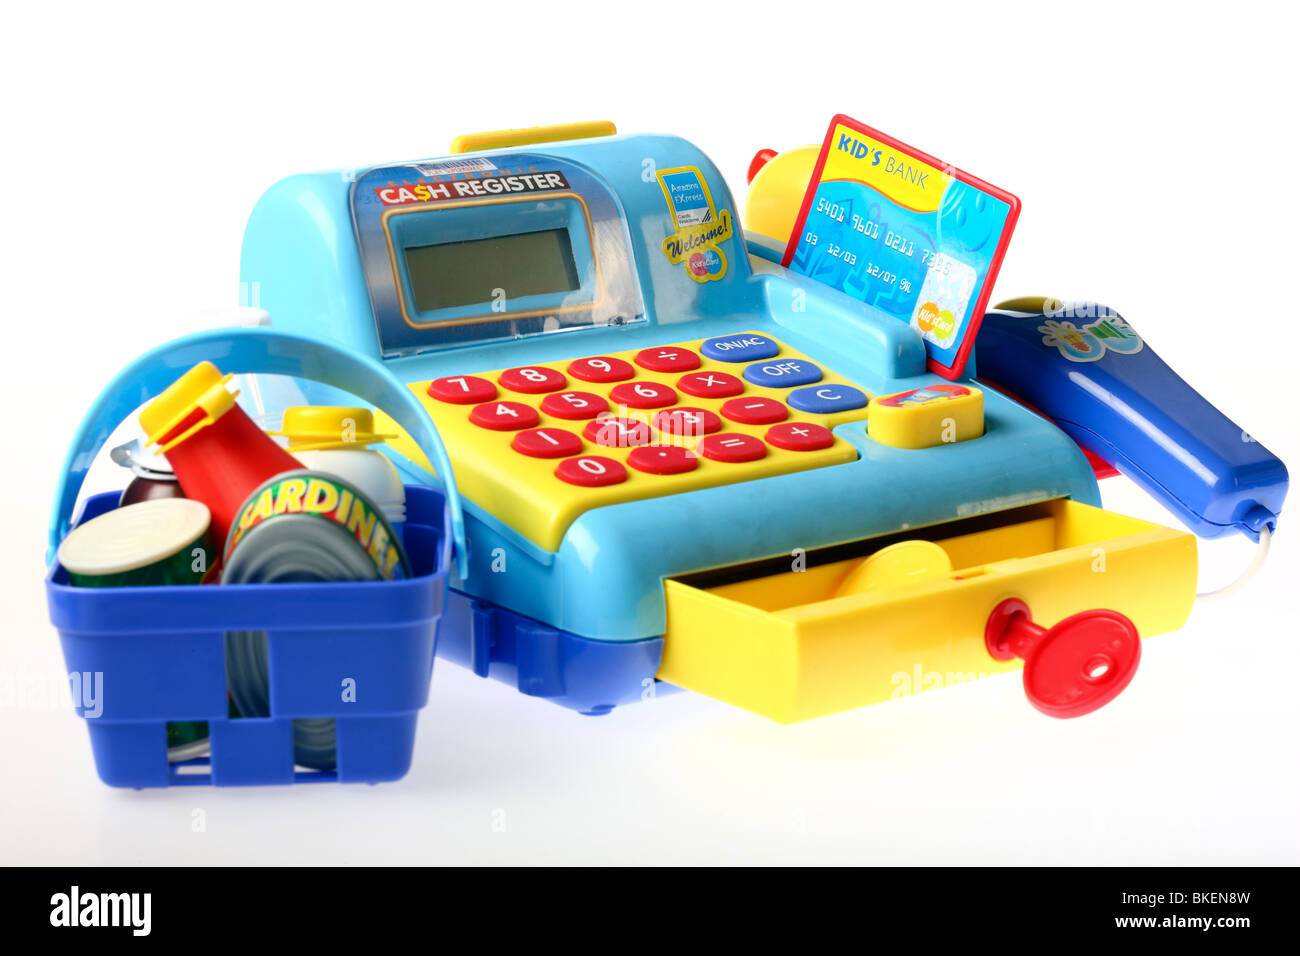 toys, till,register, exchequer, pay desk, counter Stock Photo